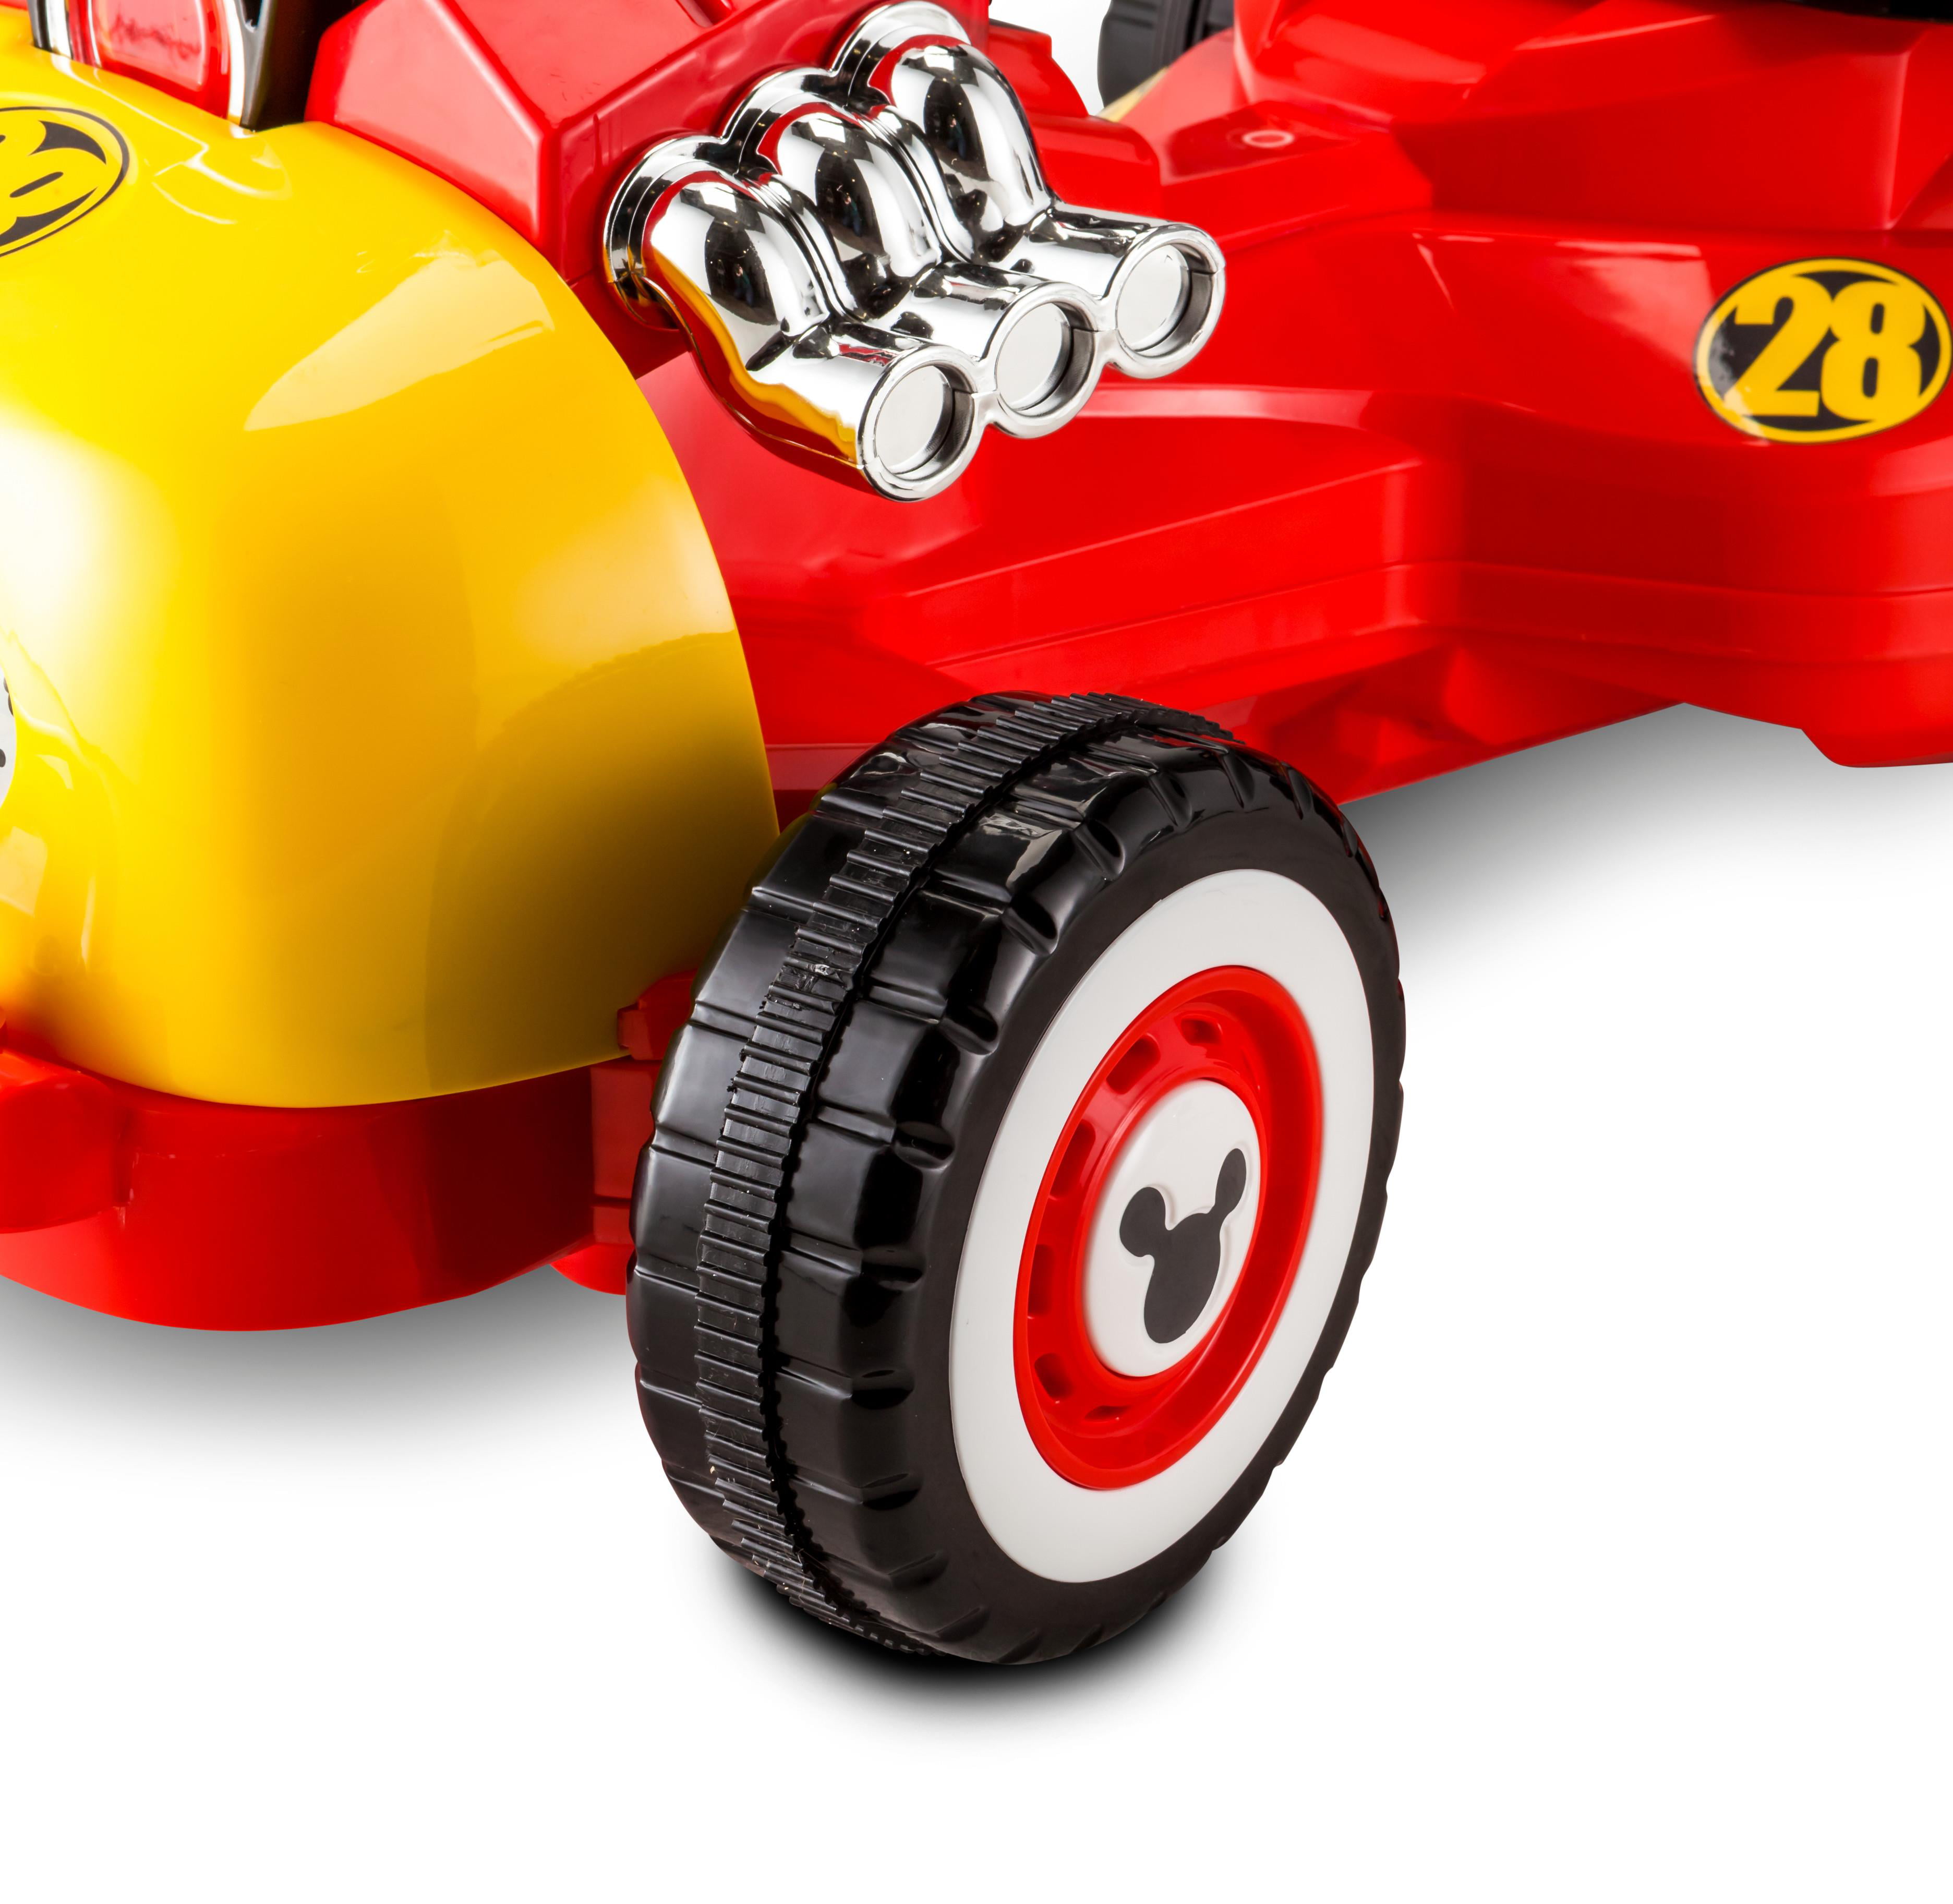 6V Mickey and the Roadster Racers Go-Cart Ride-On -